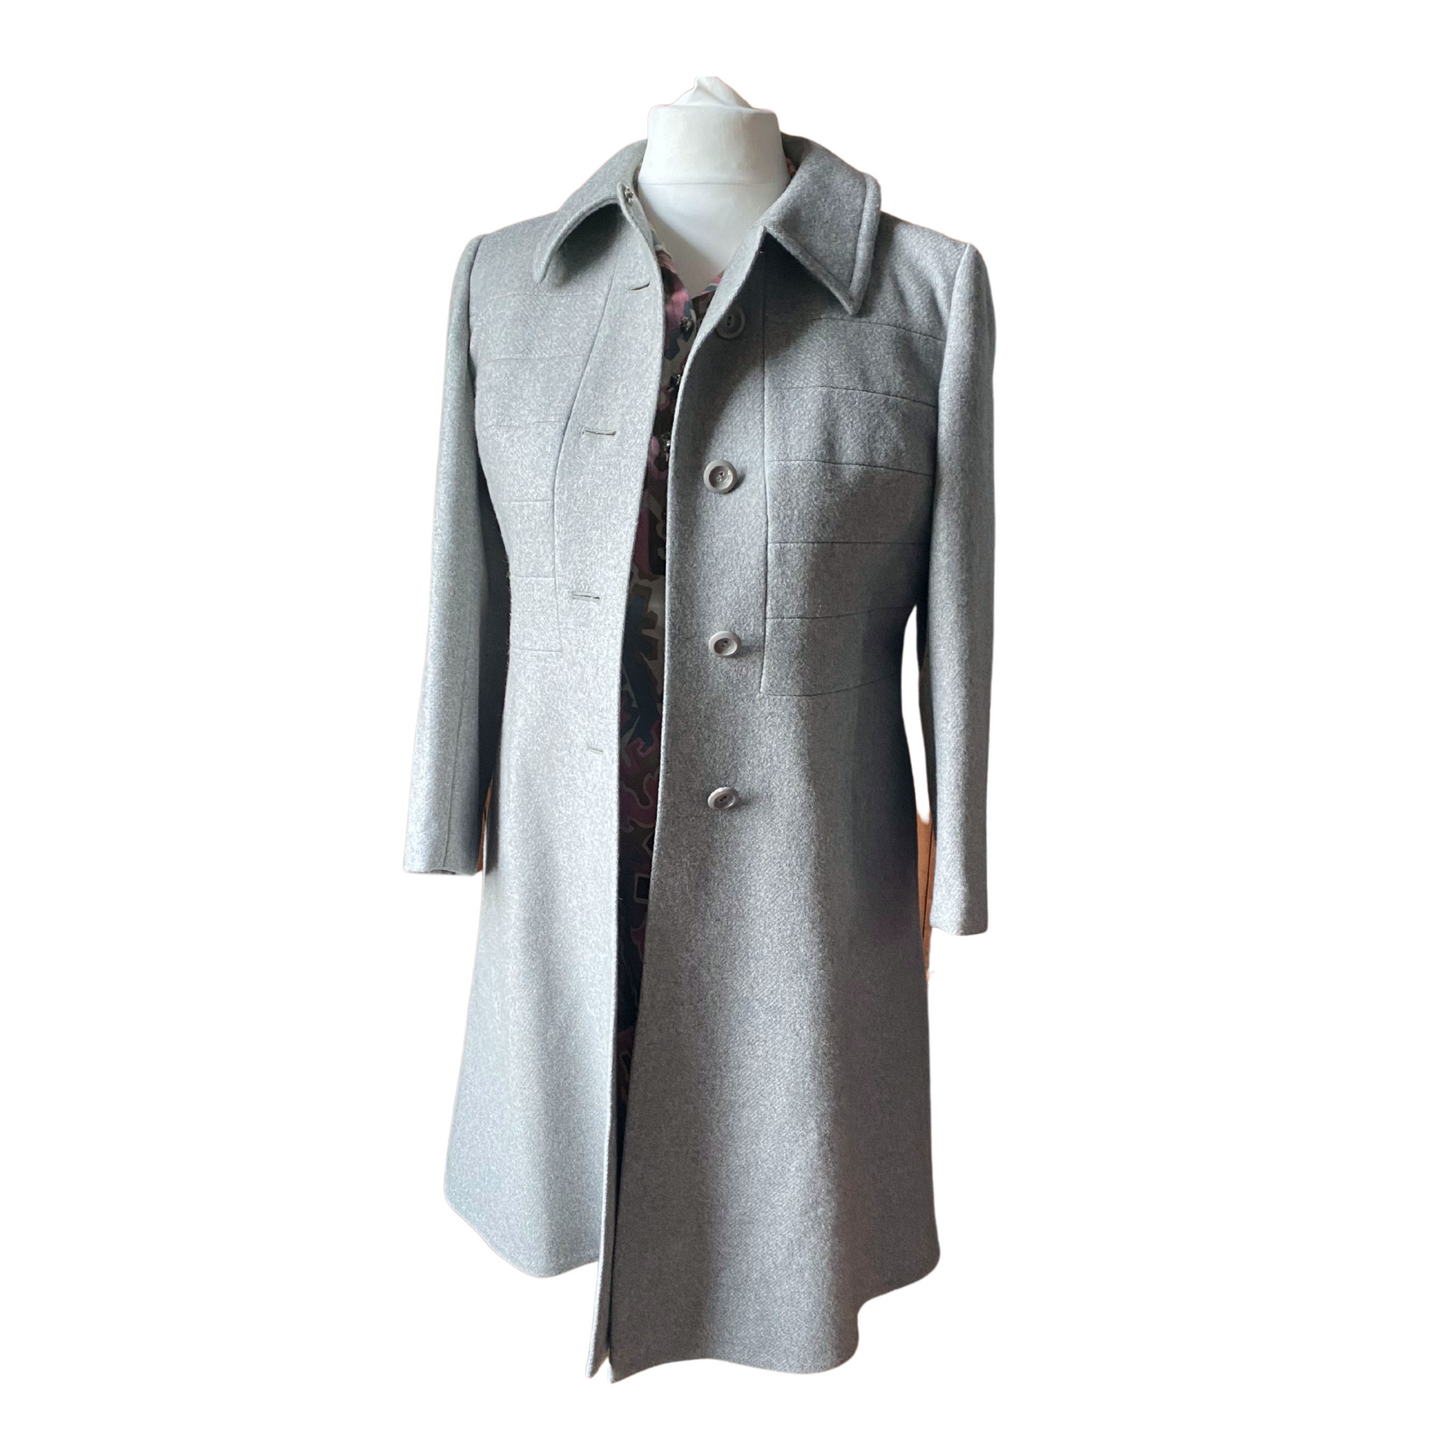 Vintage 70s Grey Wool Collared Coat with hidden side pockets. Approx UK size 12-16